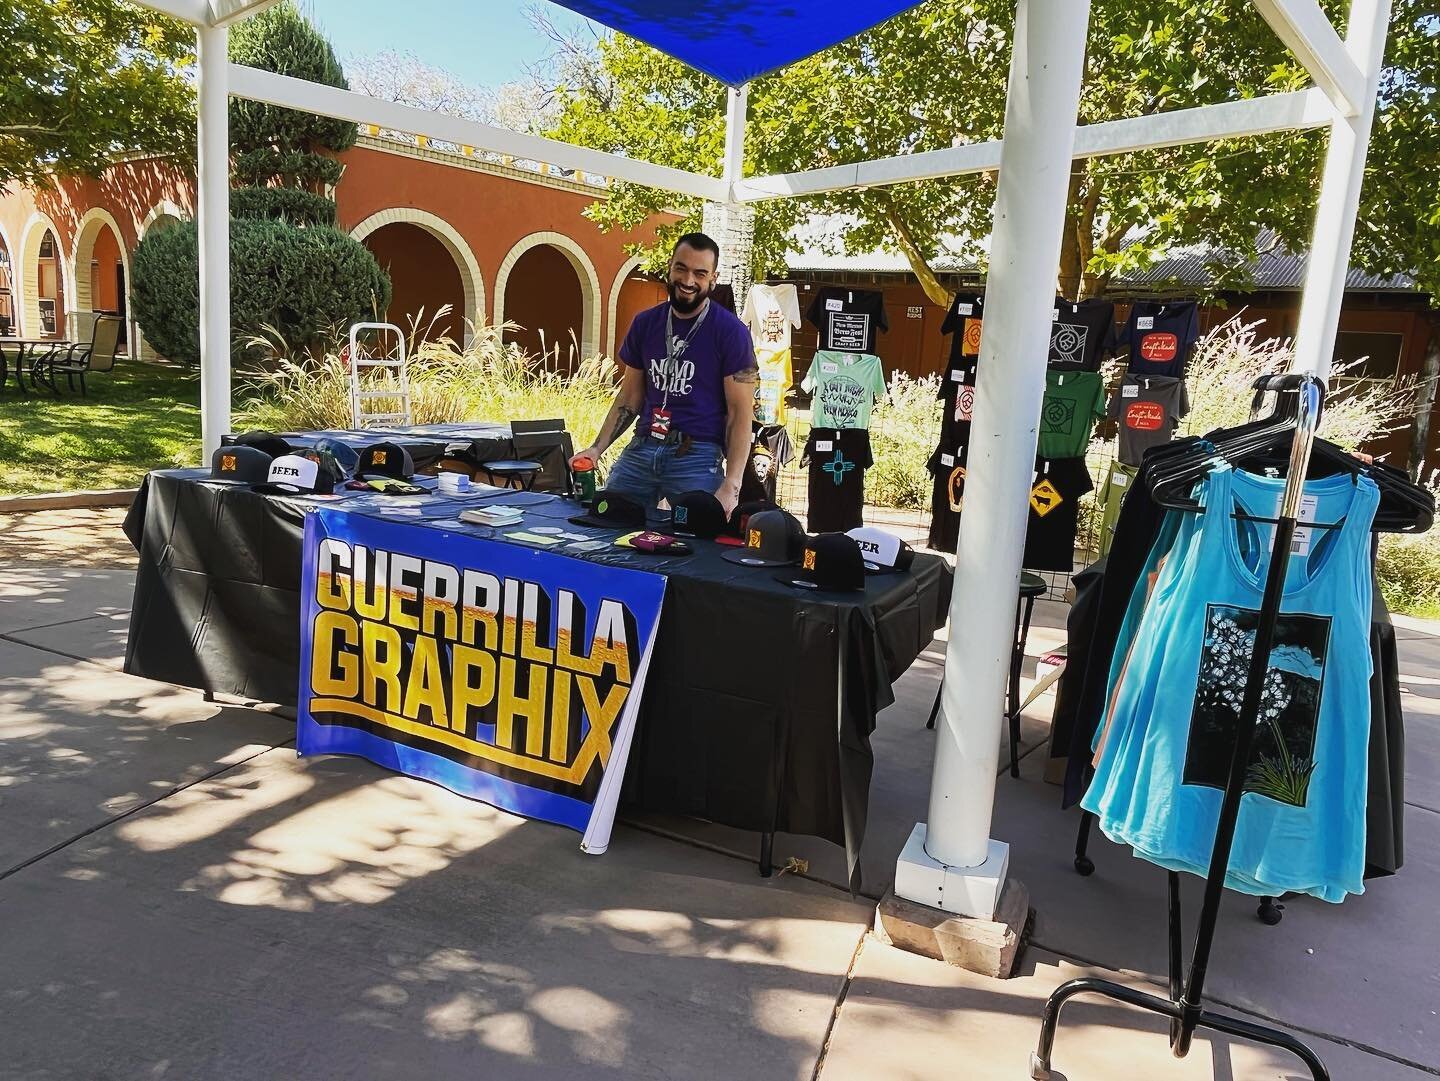 Come on down to @nmbrewfest today! We have some limited edition New Mexico Brewfest T-Shirts and caps! We also have a few of our favorite and classic screen printed shirts! We are located in the NM State Fair Grounds Villa Hispana.